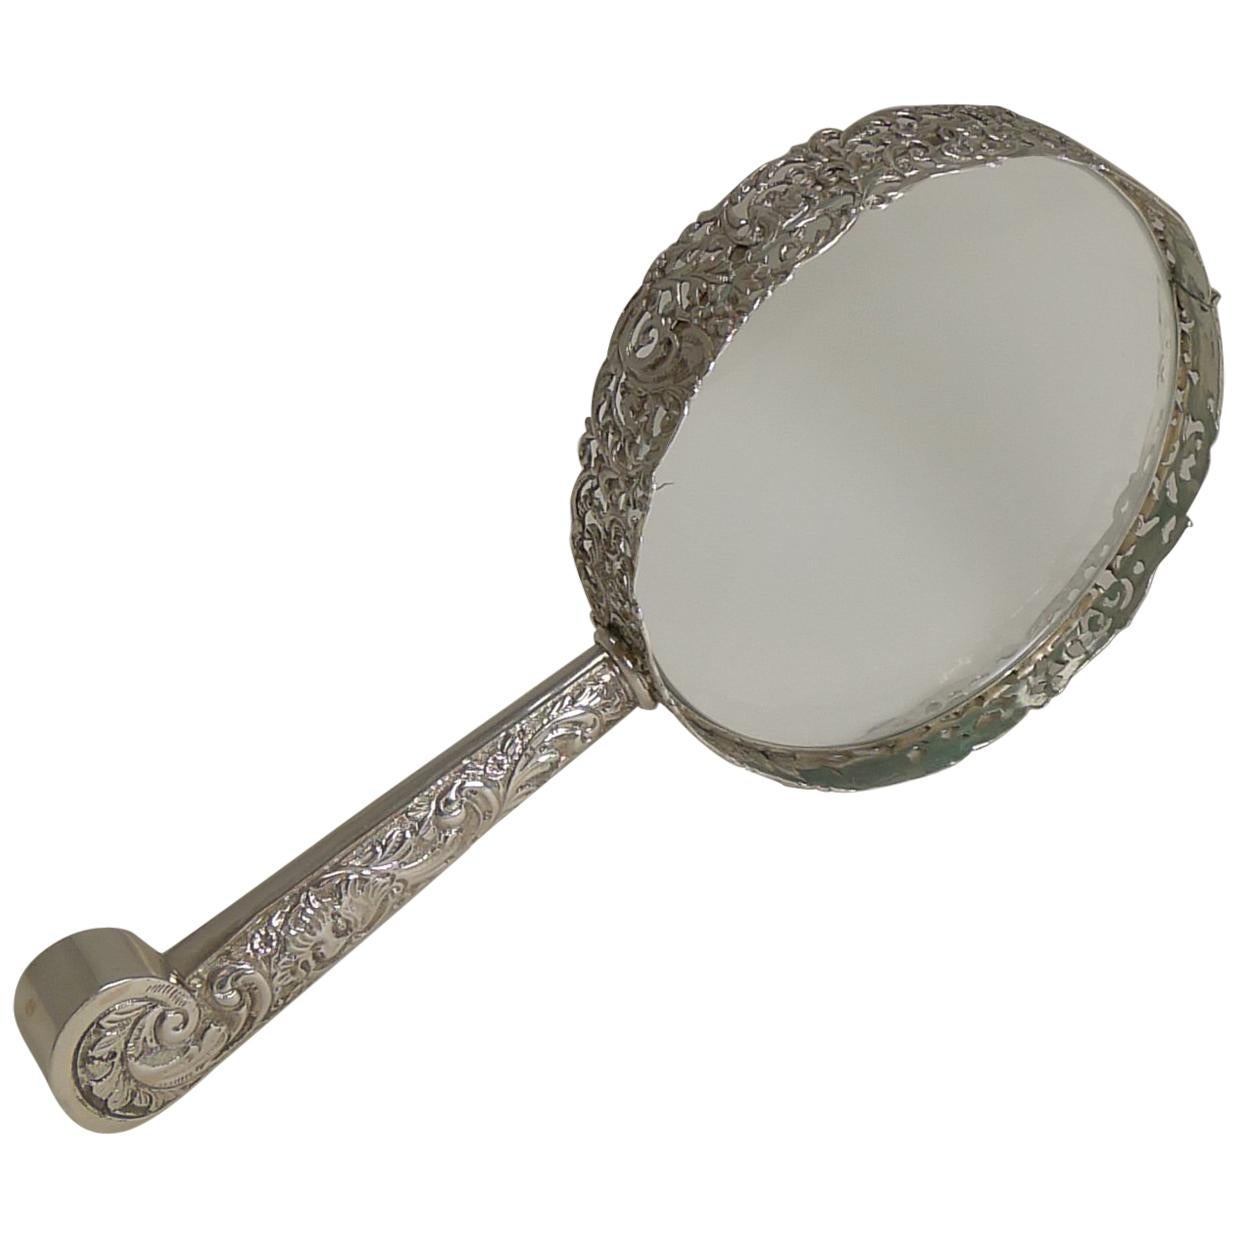 Huge Antique English Sterling Silver Magnifying Glass by Samuel Jacob, 1897